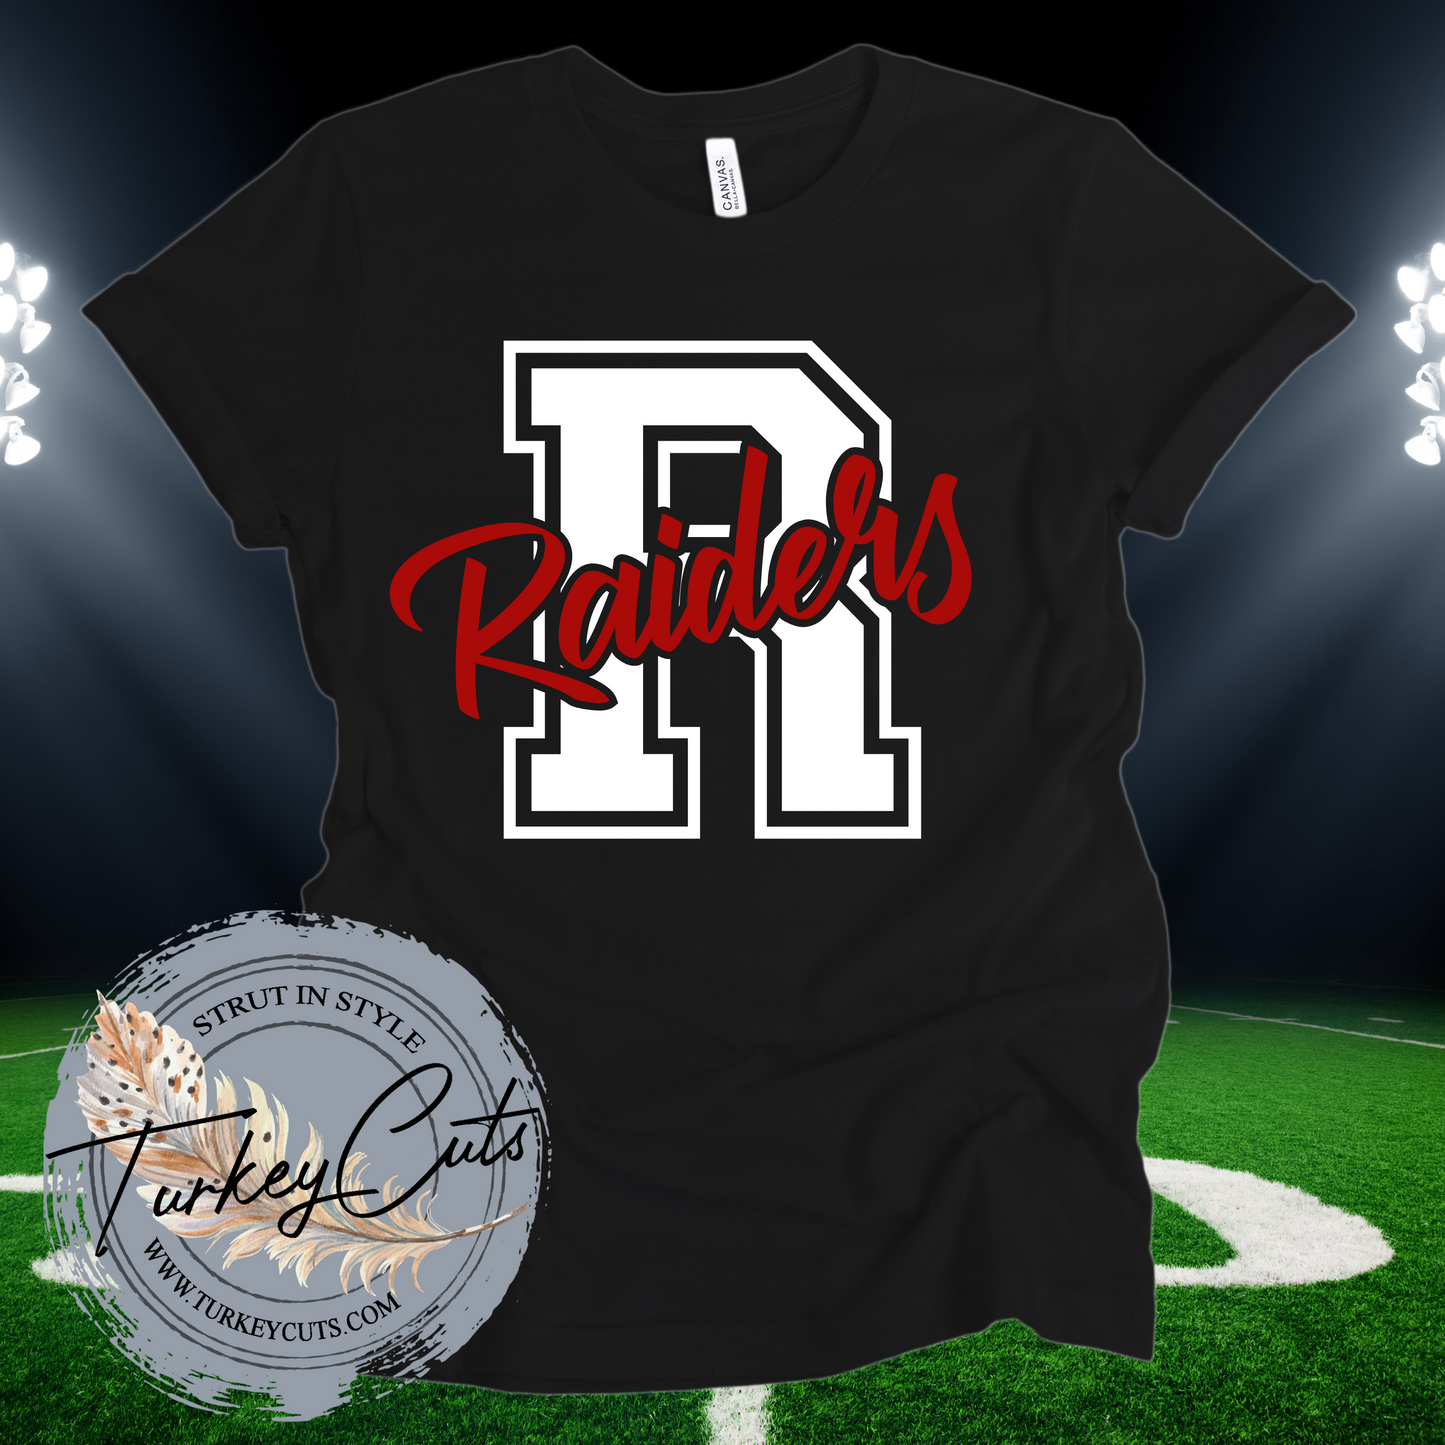 Raiders Anytime Wear (YOUTH)